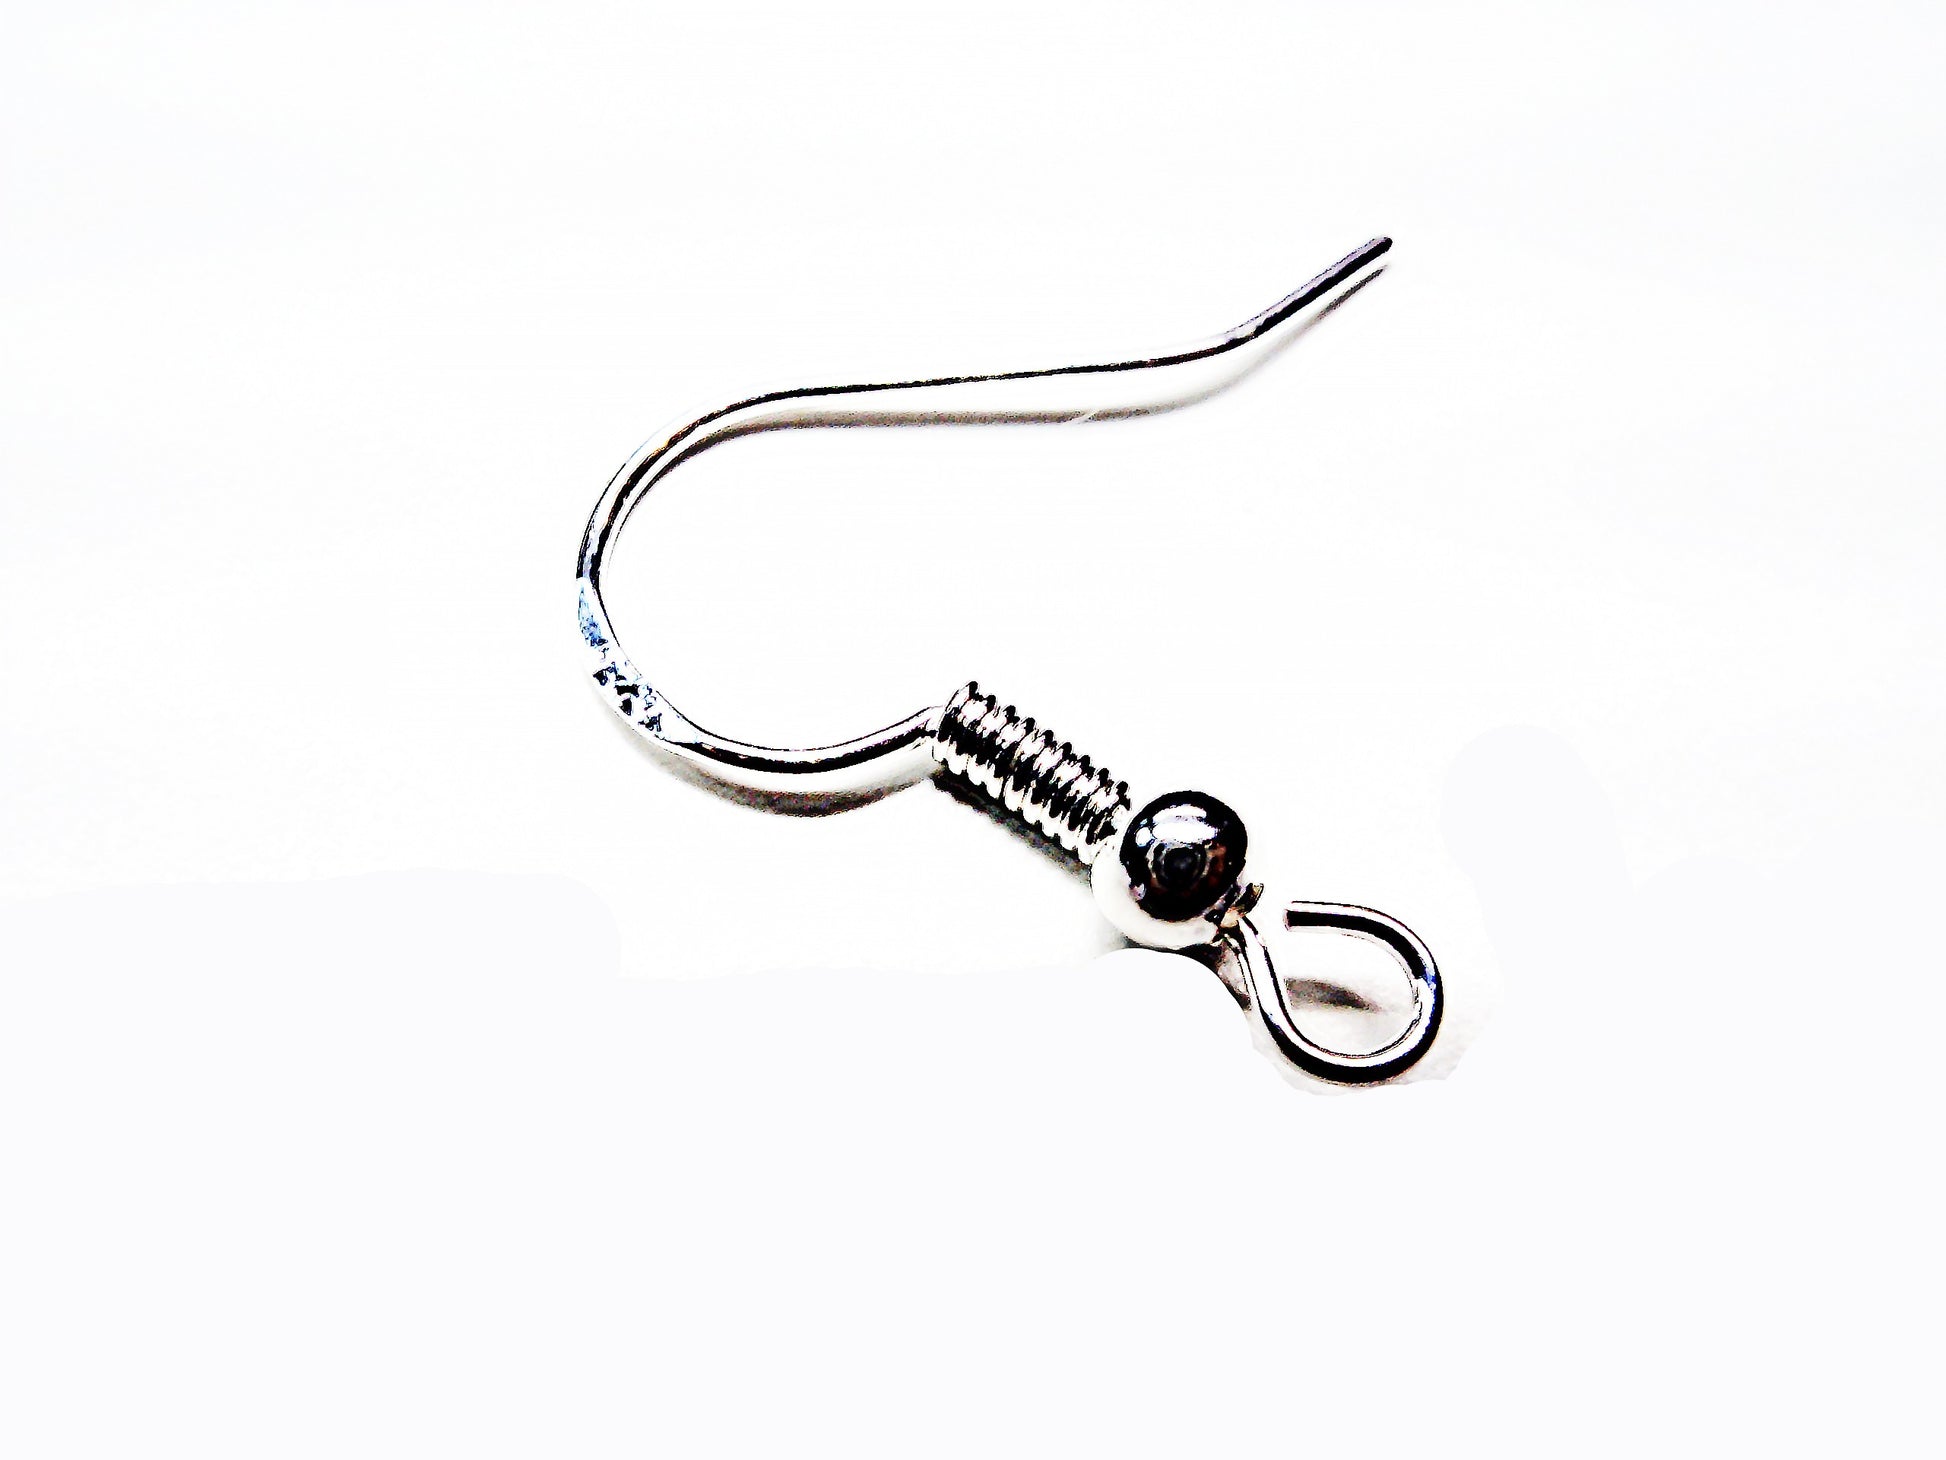 Fish Hook ear wire with ball - Providence silver gold jewelry usa